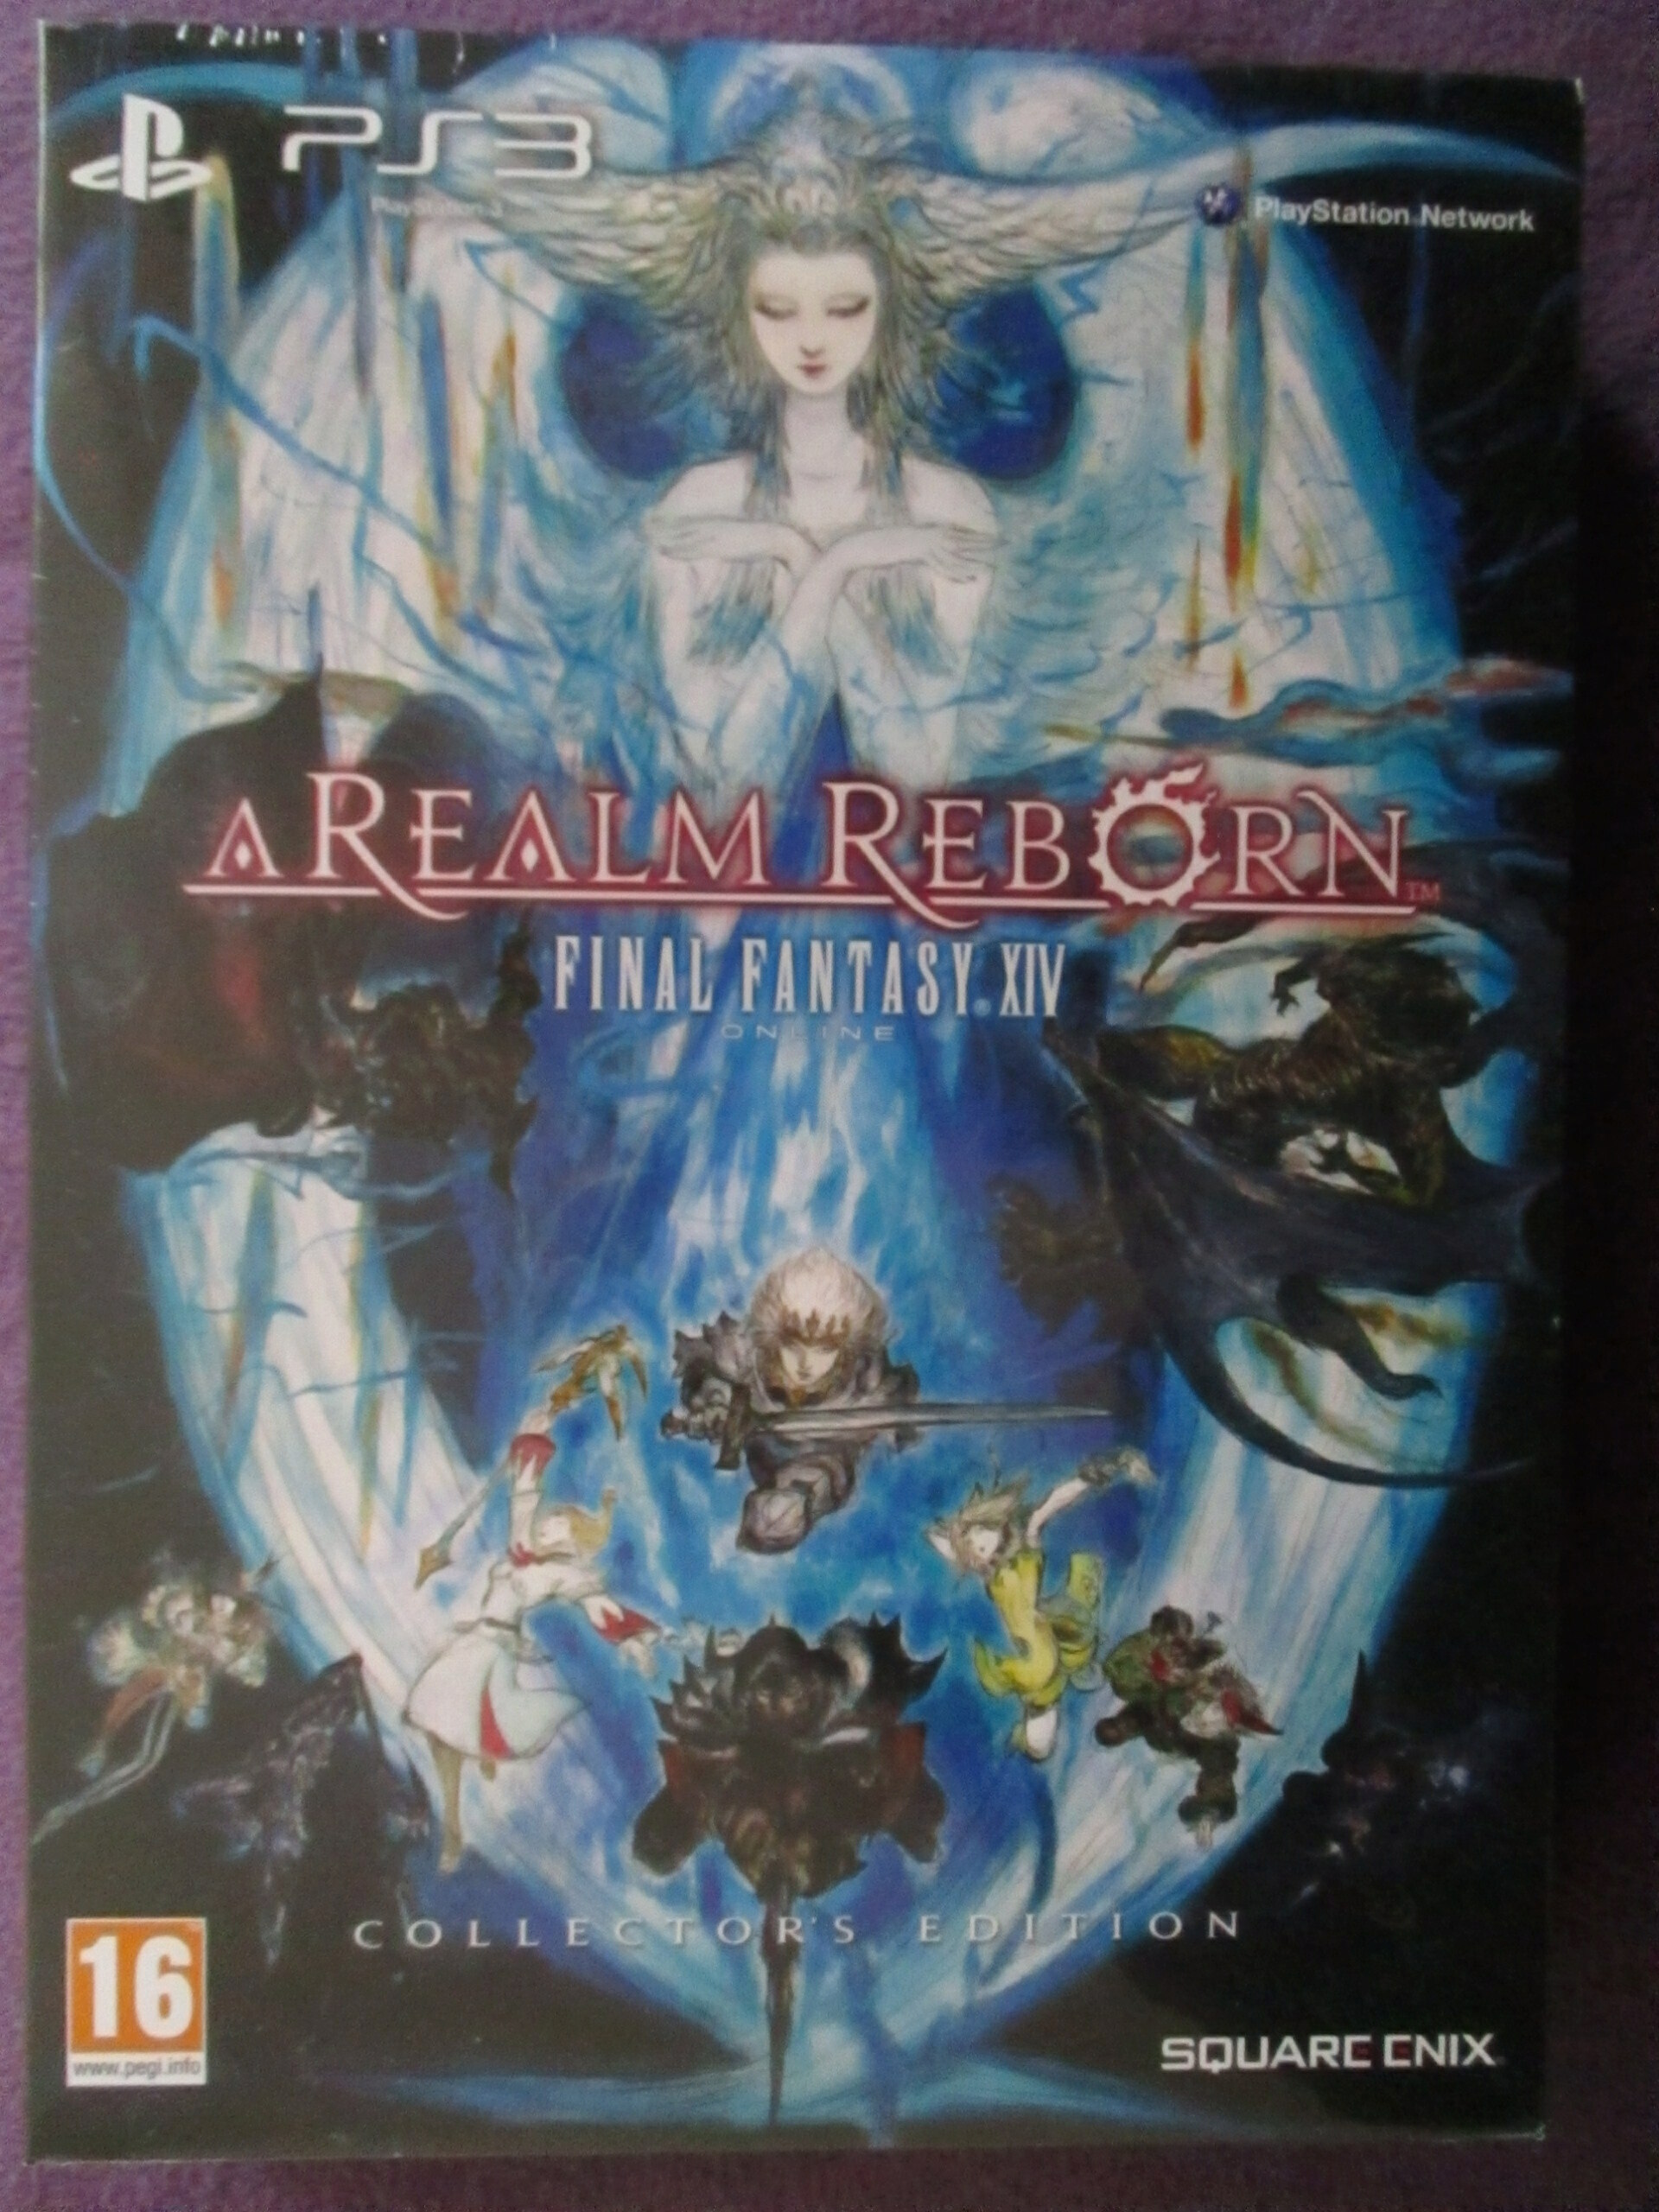 [VDS] Final Fantasy XIV a Realm Reborn Collector's Edition PS3 Img_1013